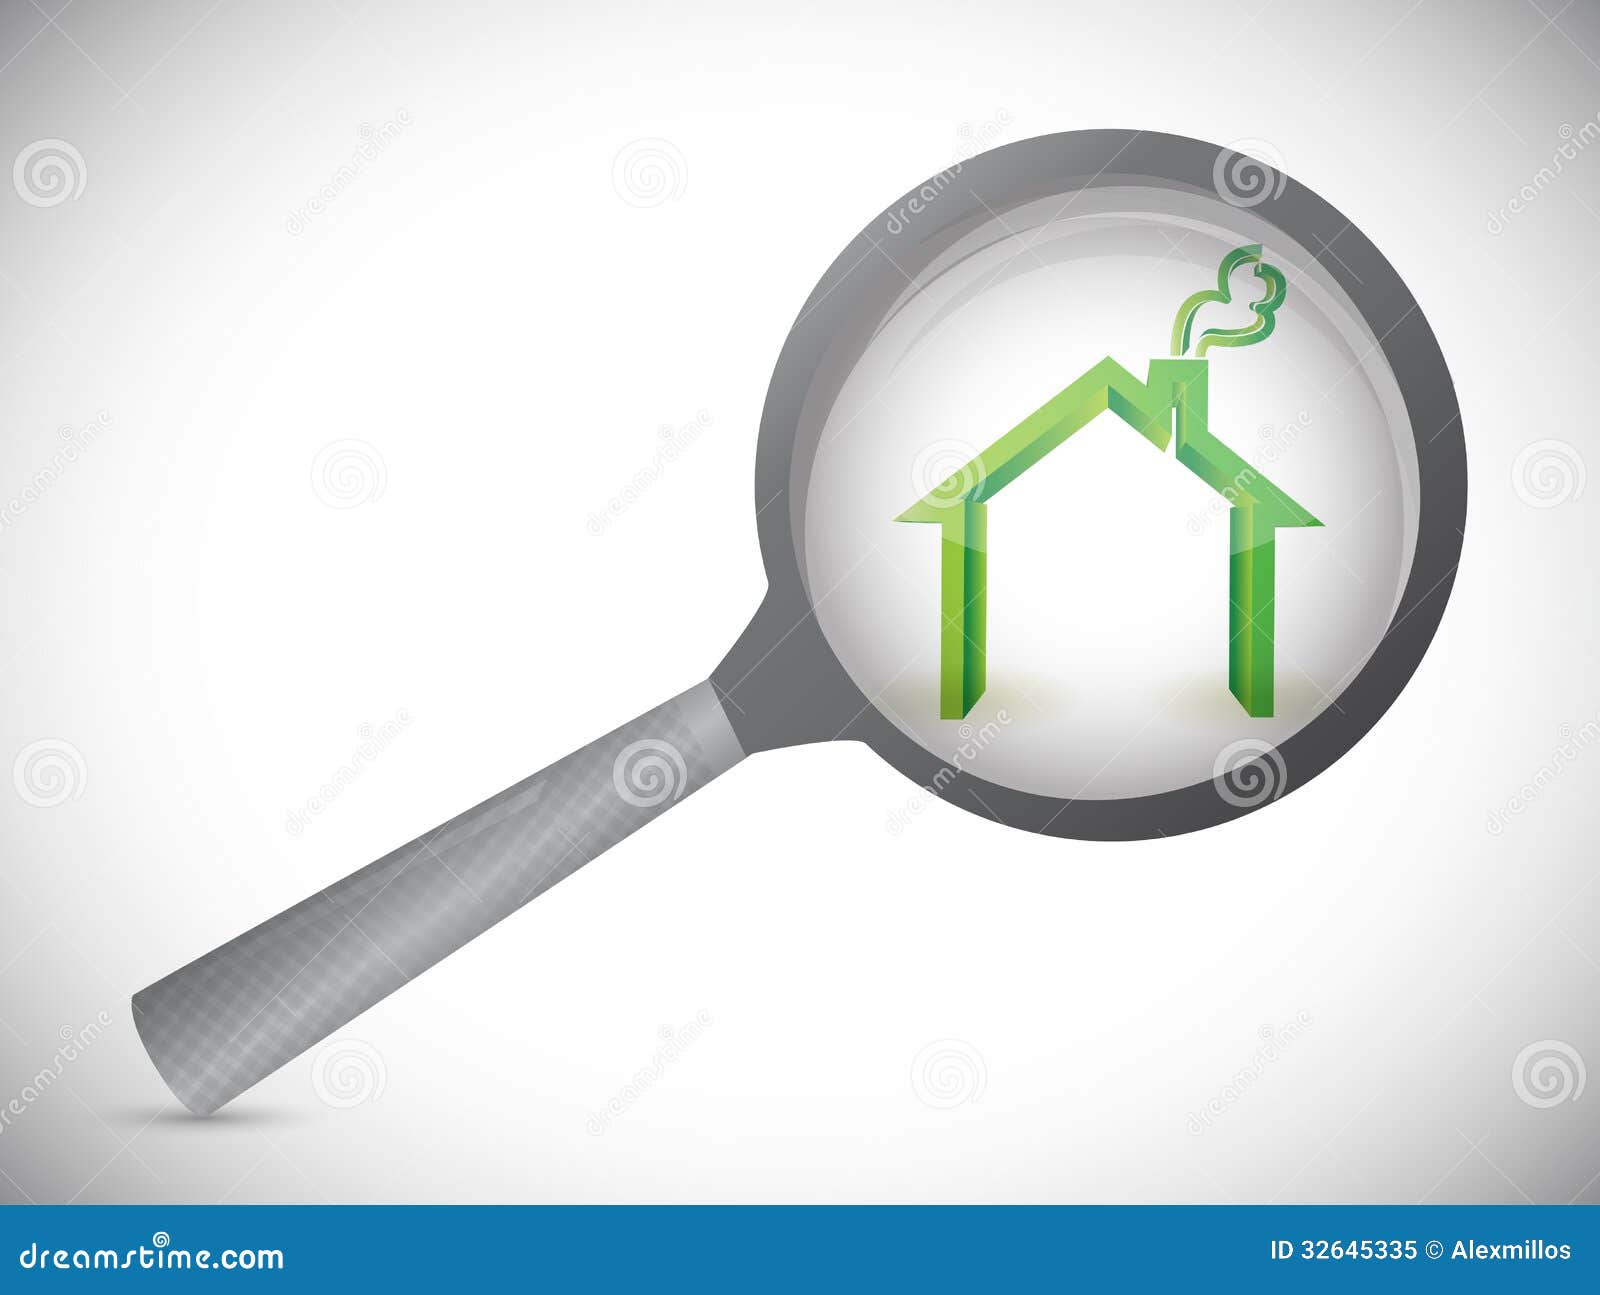 home inspector clipart - photo #42